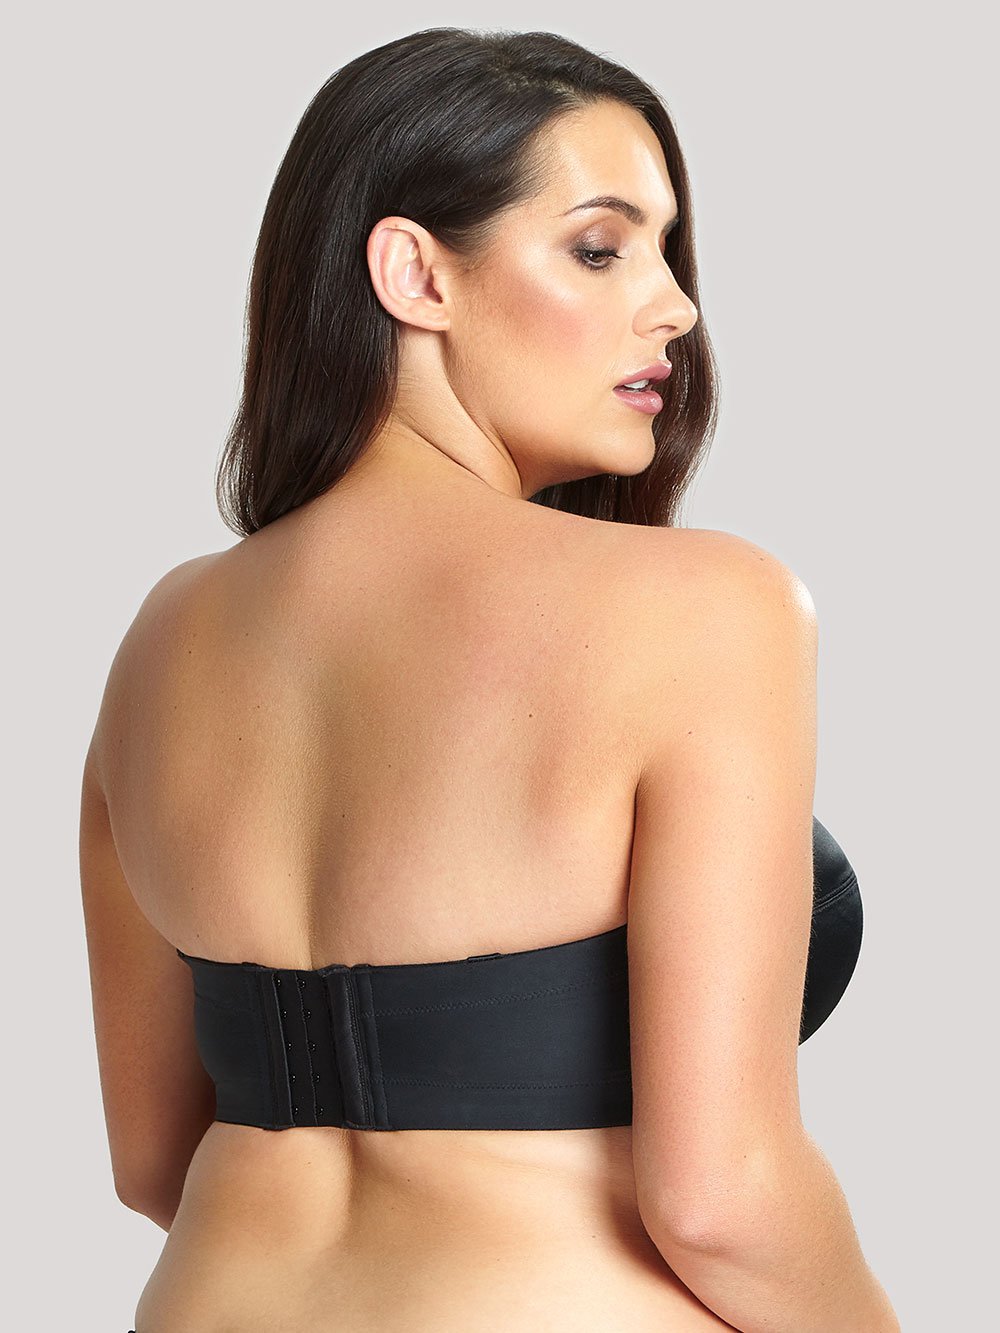 Plus Size Backless Strapless Seamless Bra And Underwear With Push